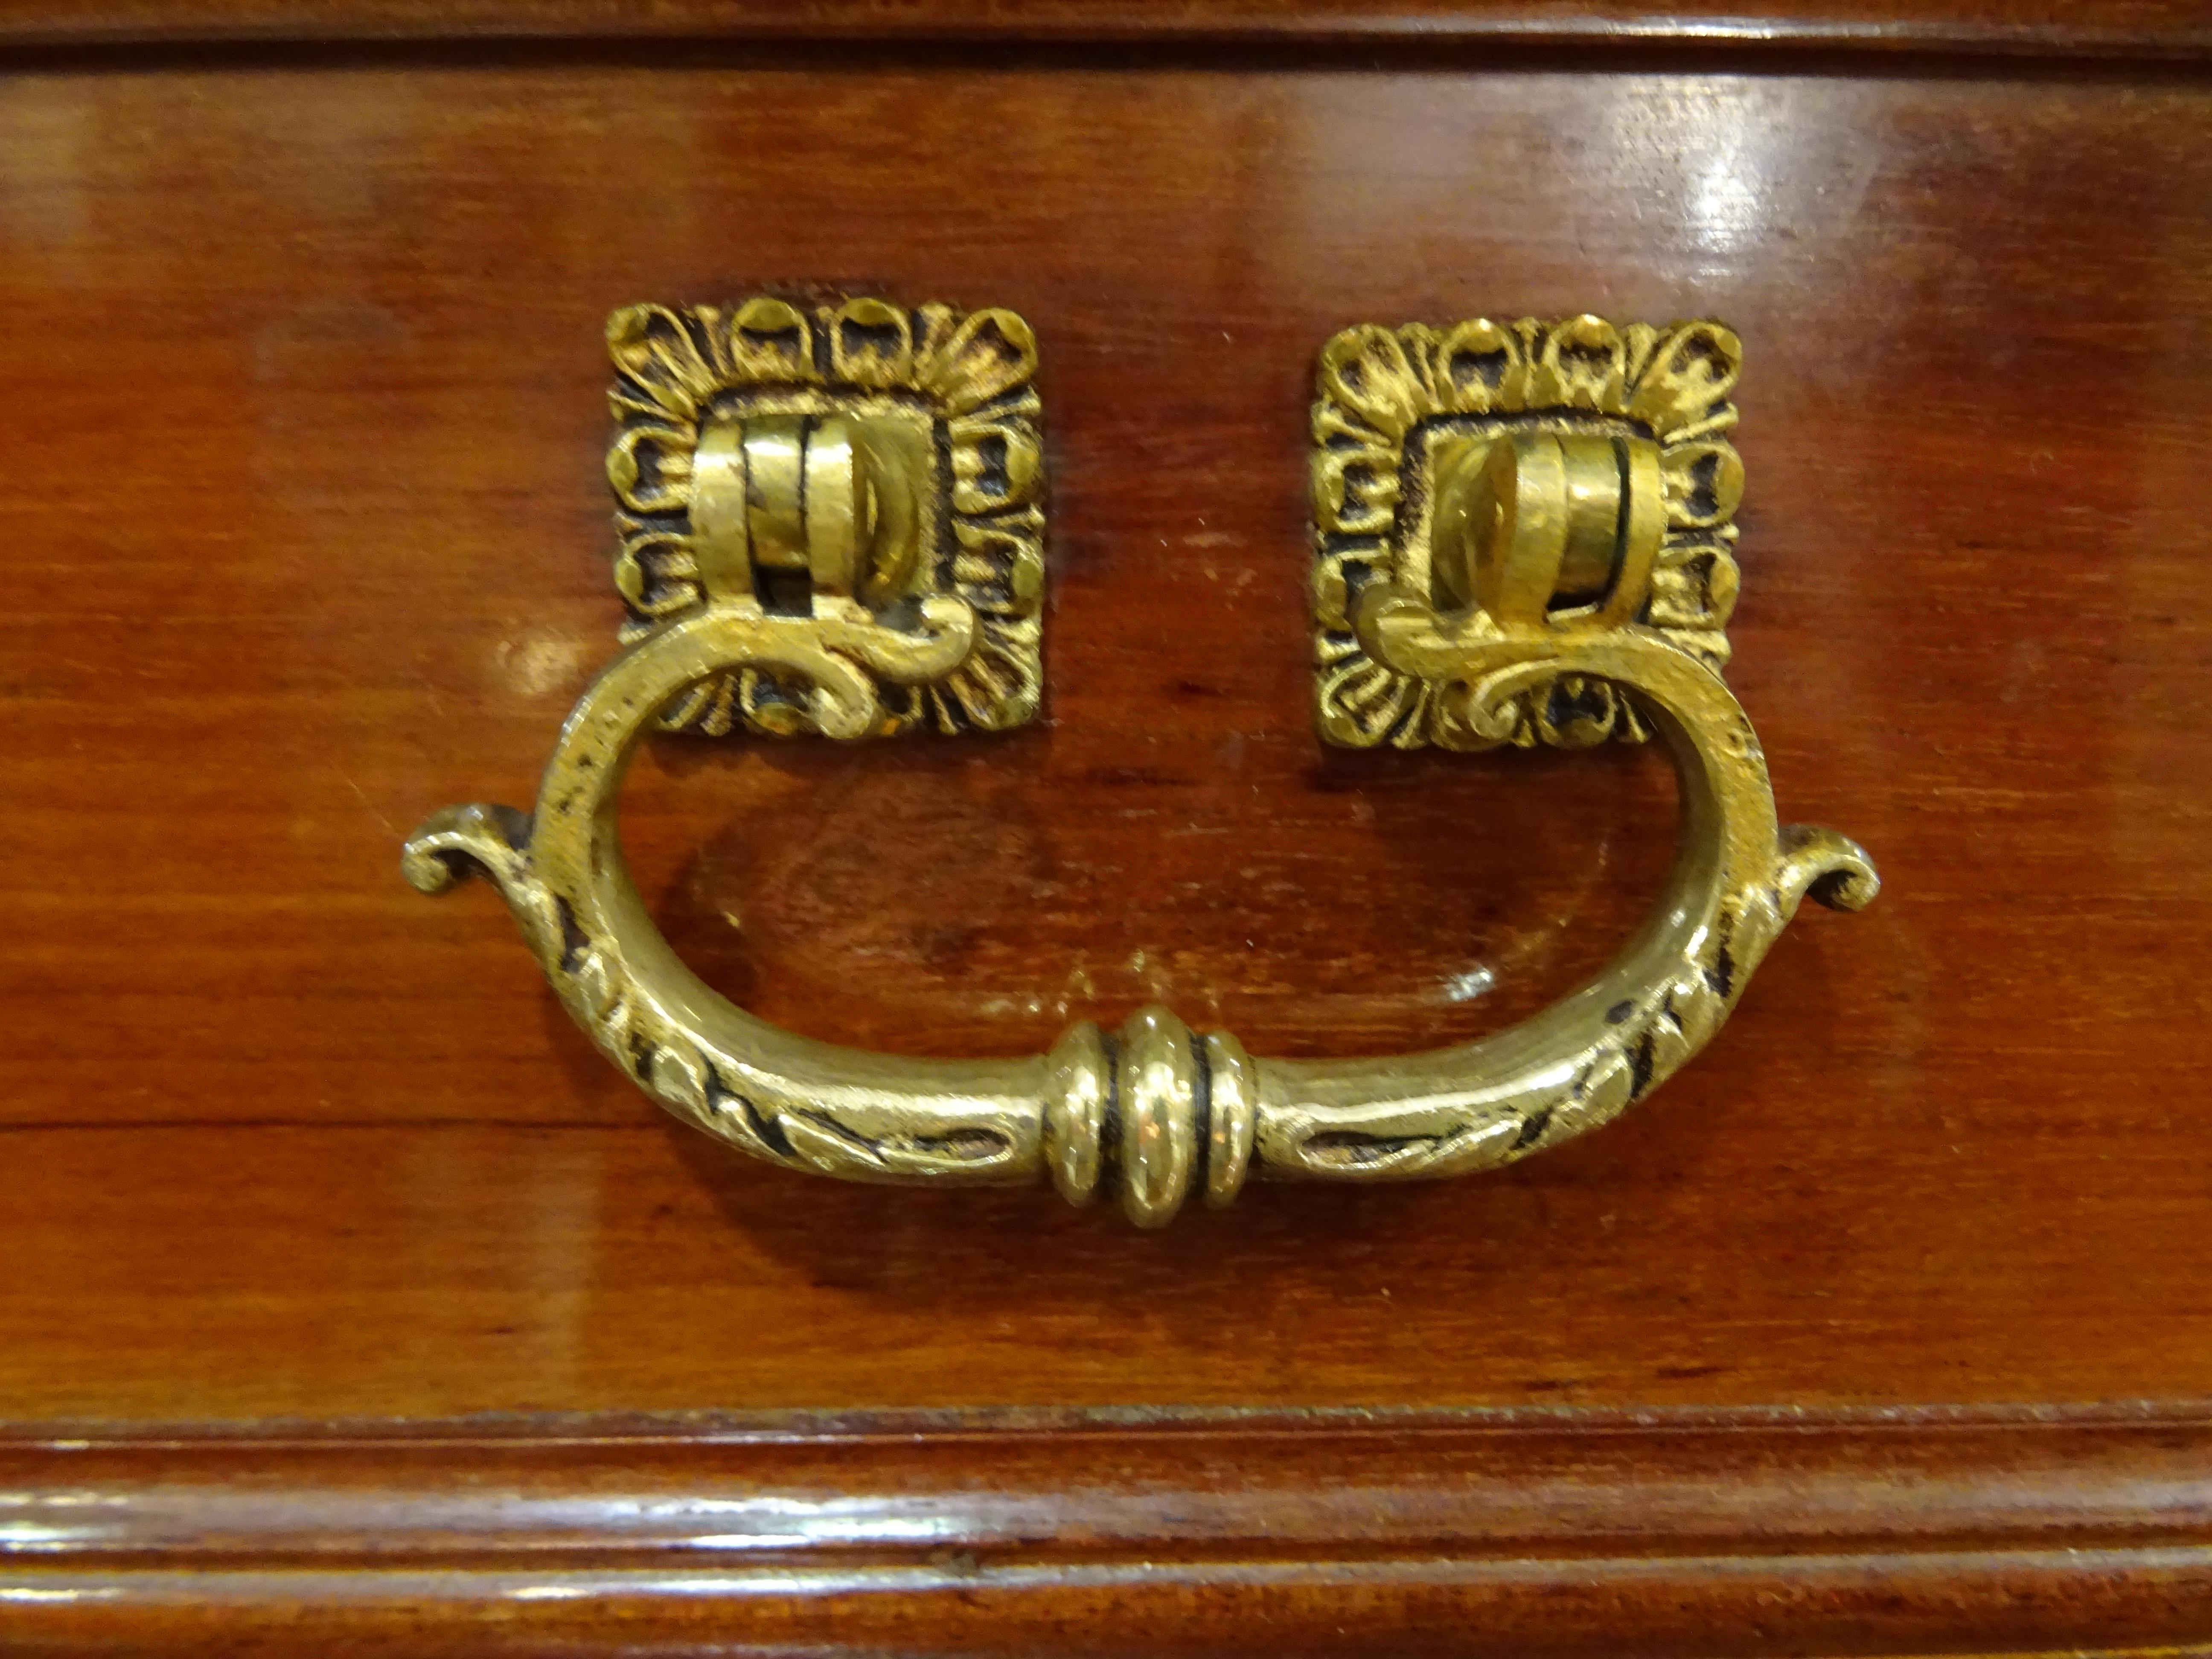 English Cabinet, Wood and Bronce, from Dº Juan De Borbon and Dª María Collection 4